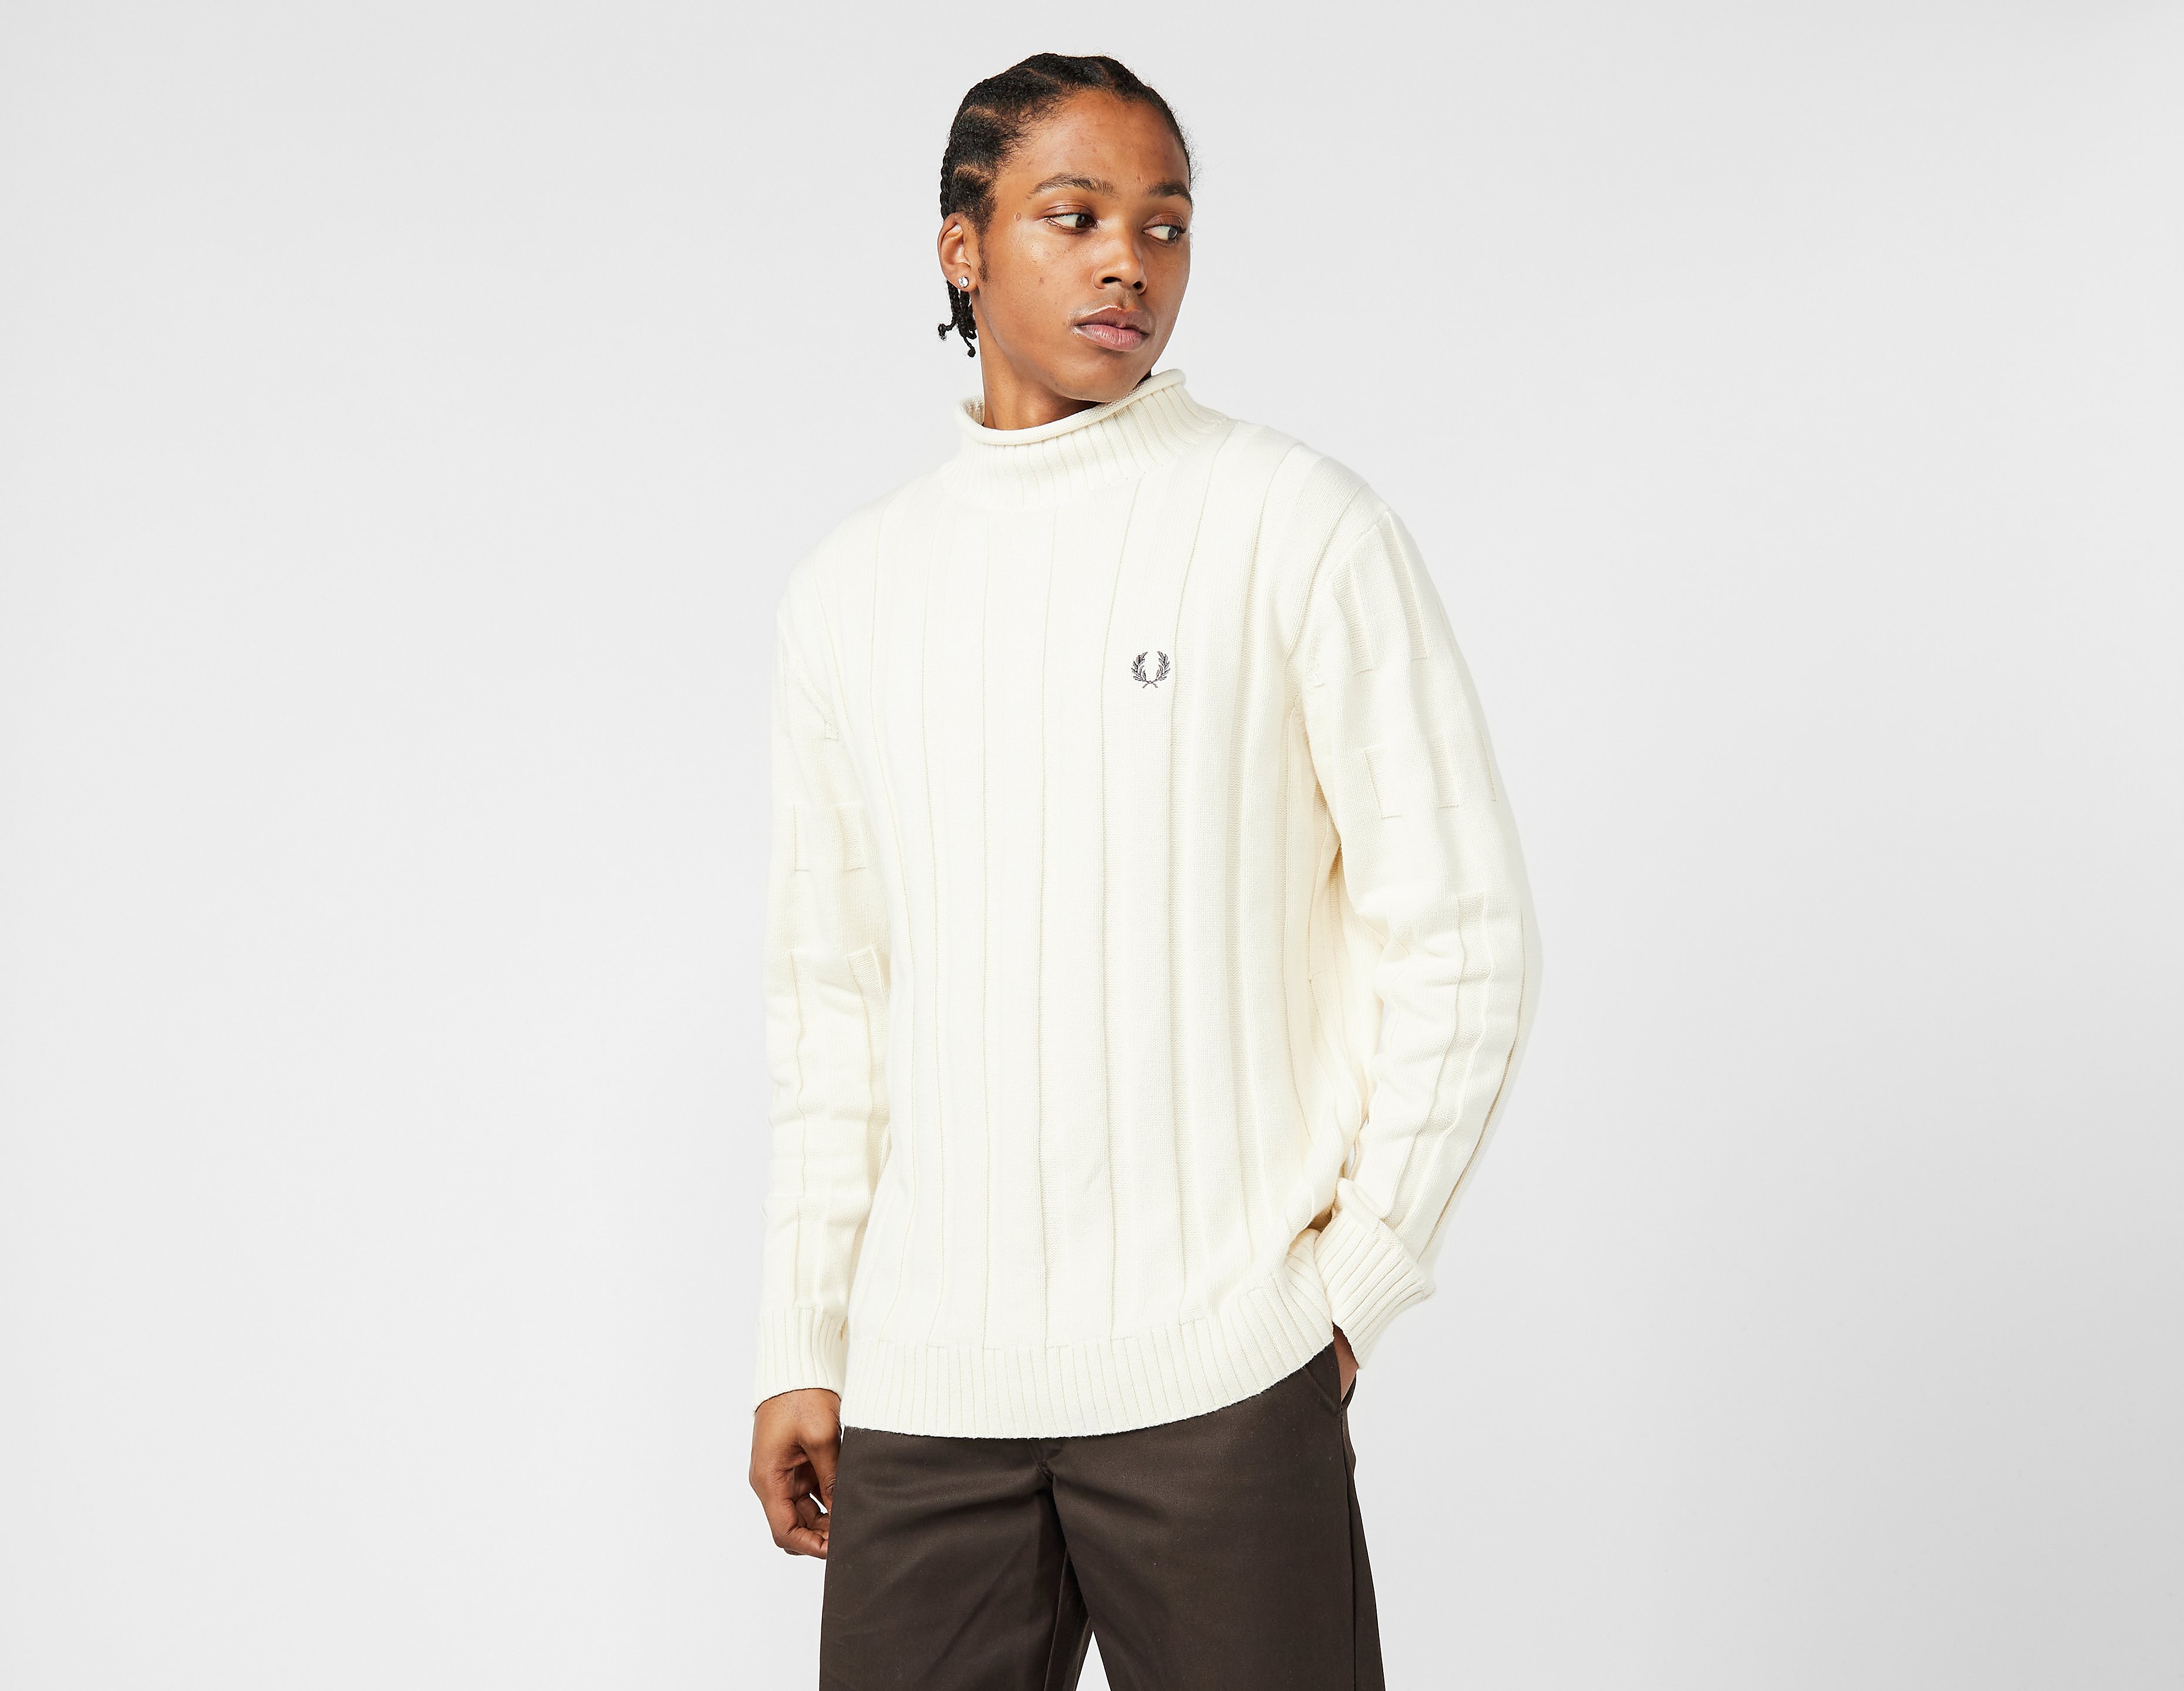 Fred Perry Textured Roll Neck Jumper